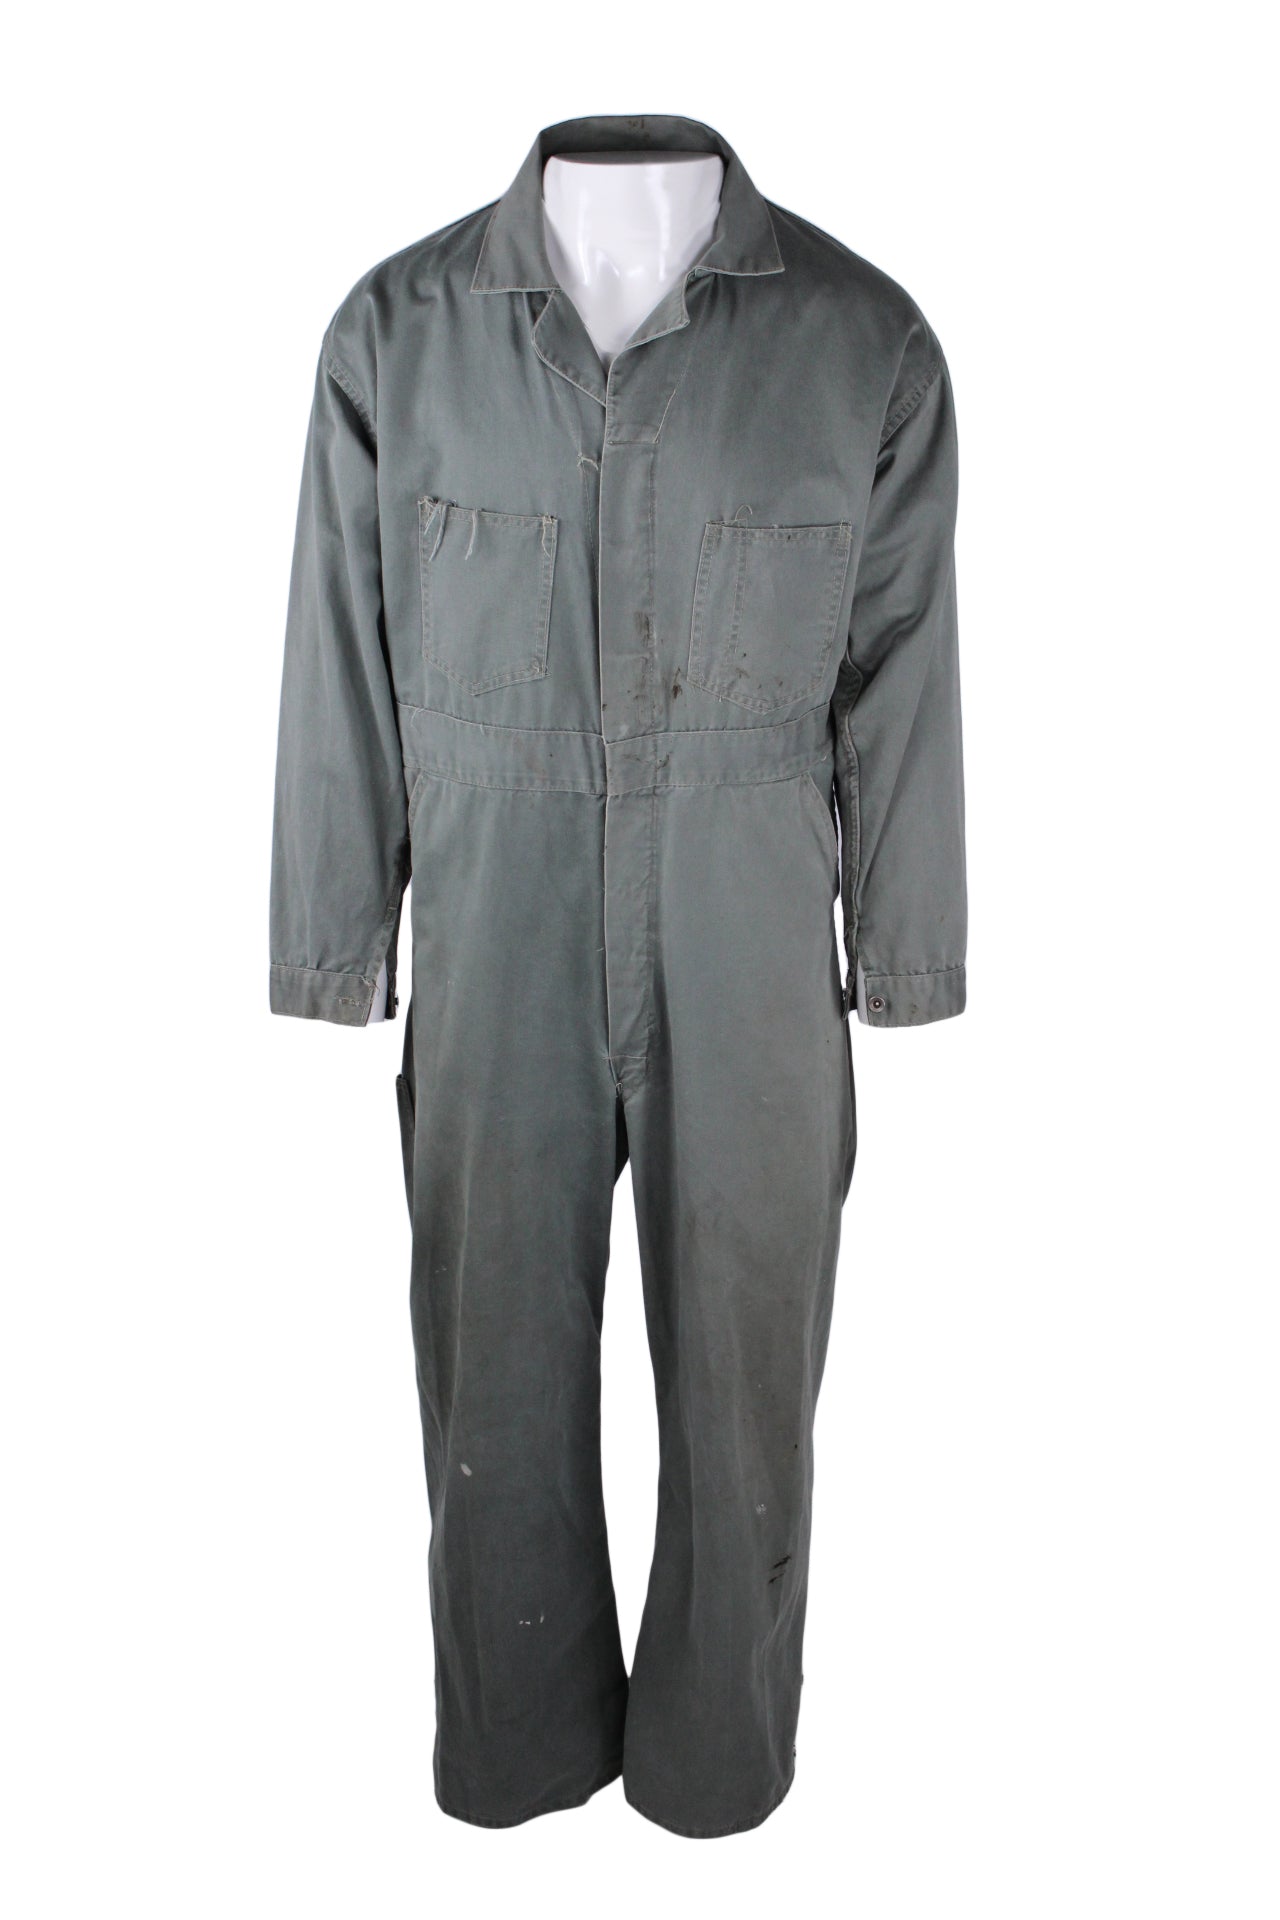 front view of vintage 40’s/50’s faded lincoln green button up coveralls. features double breasted pockets, side hand pockets, side holes to reach within, right rear pocket, and buttons at cuffs.